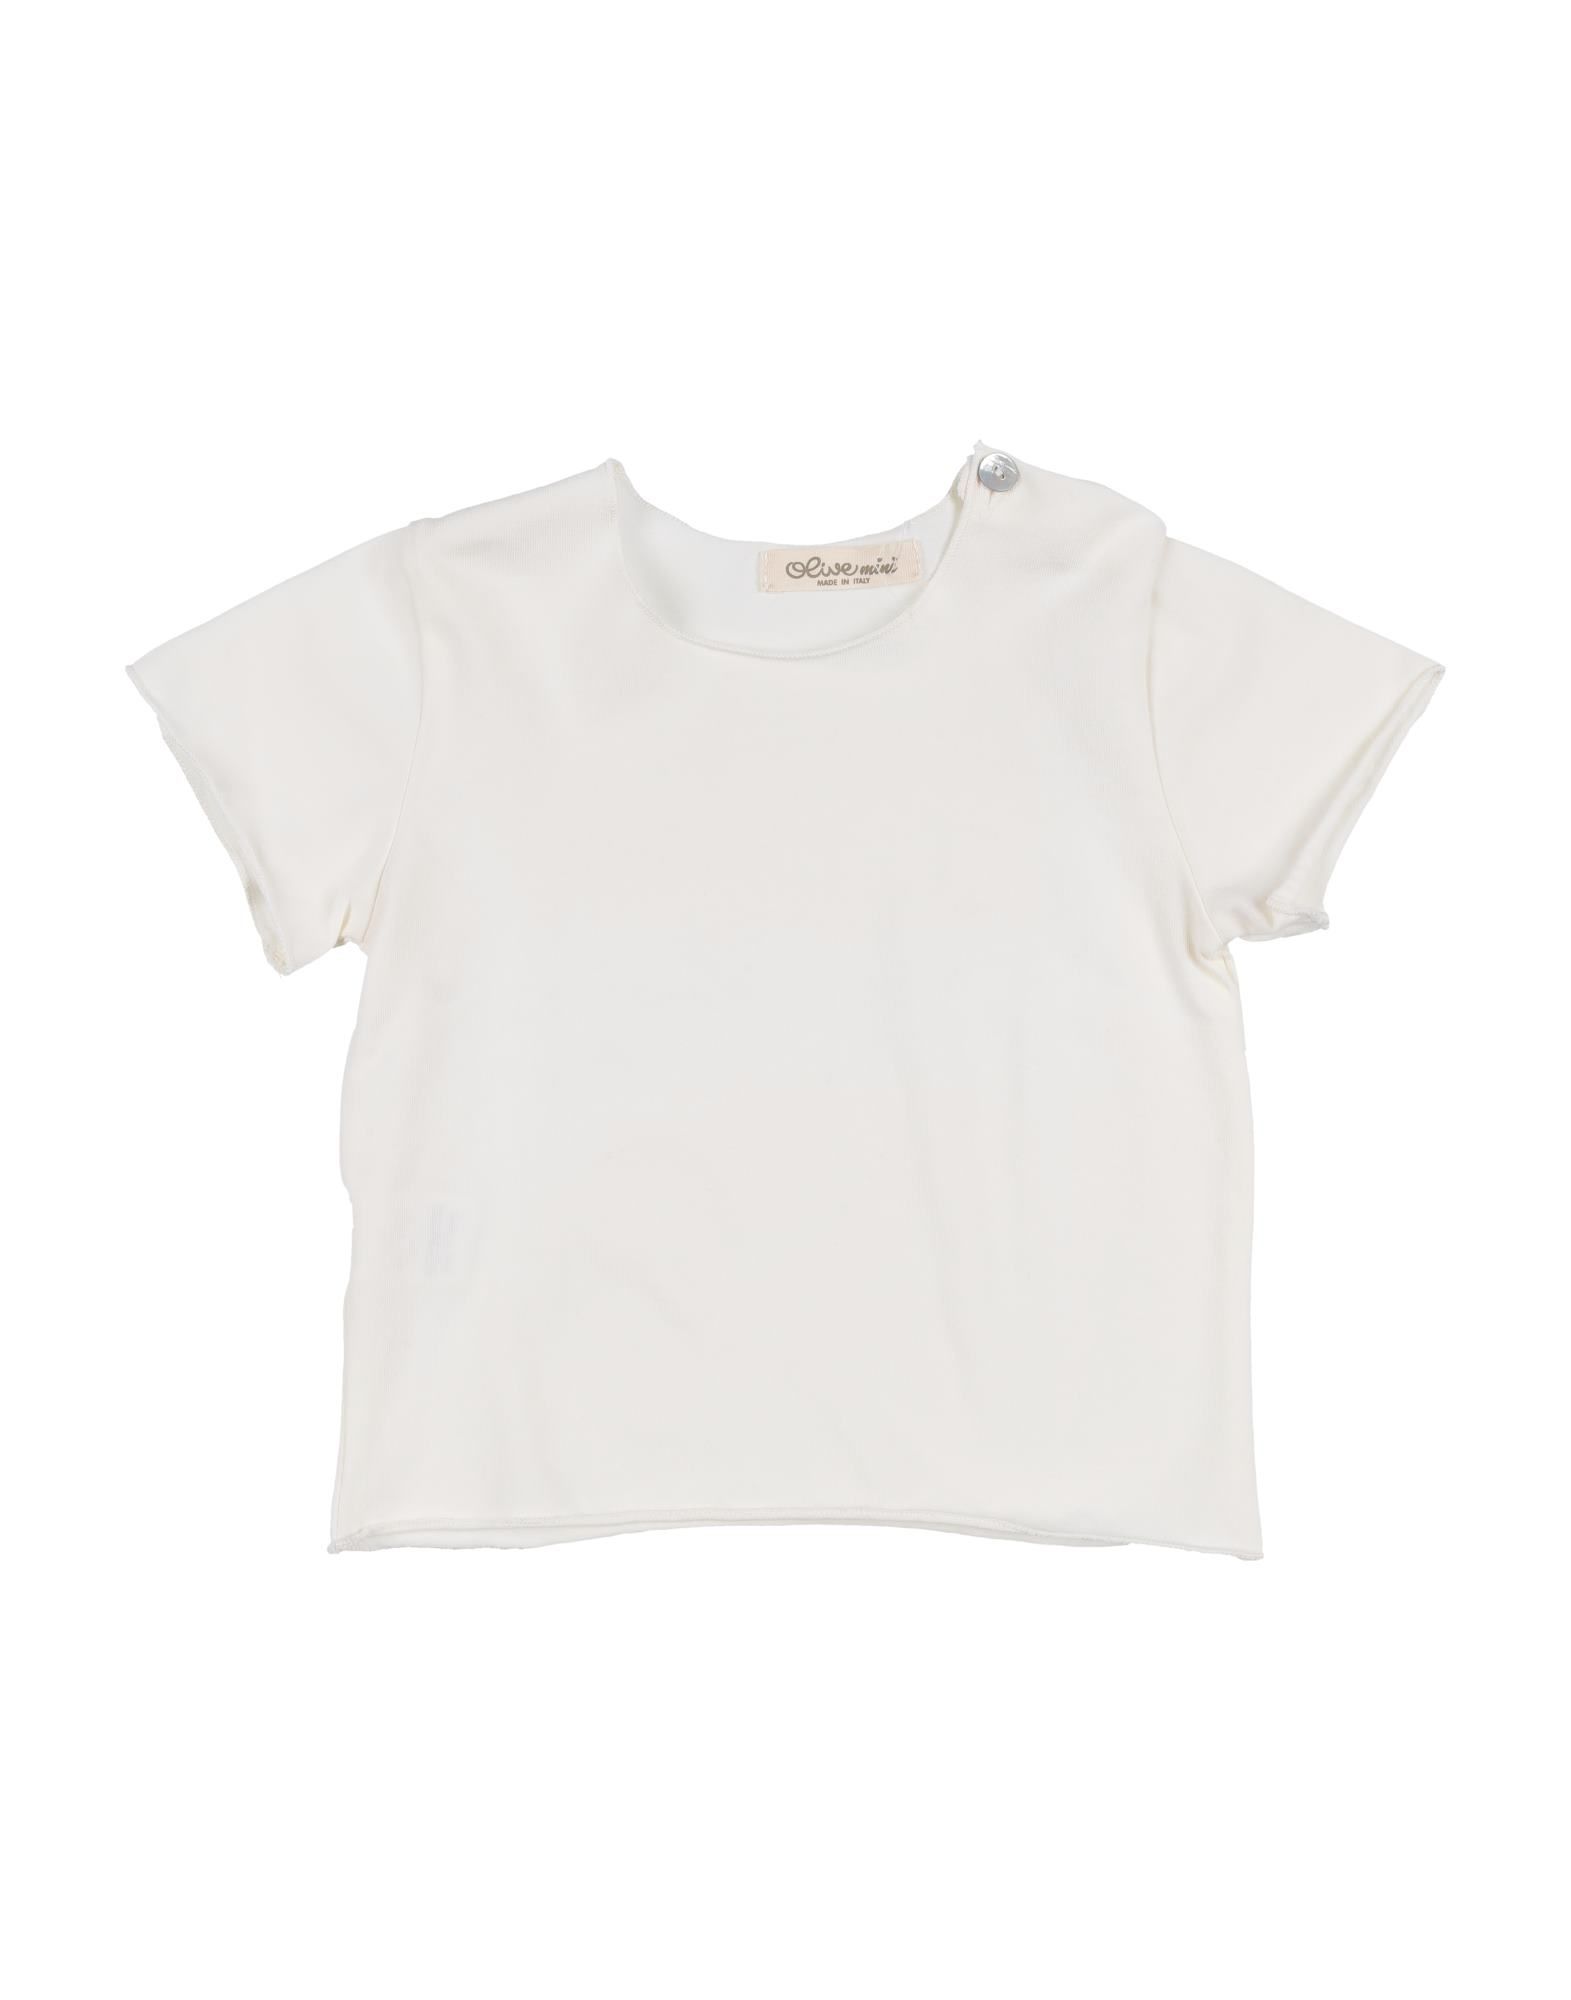 Olive Kids' T-shirts In White